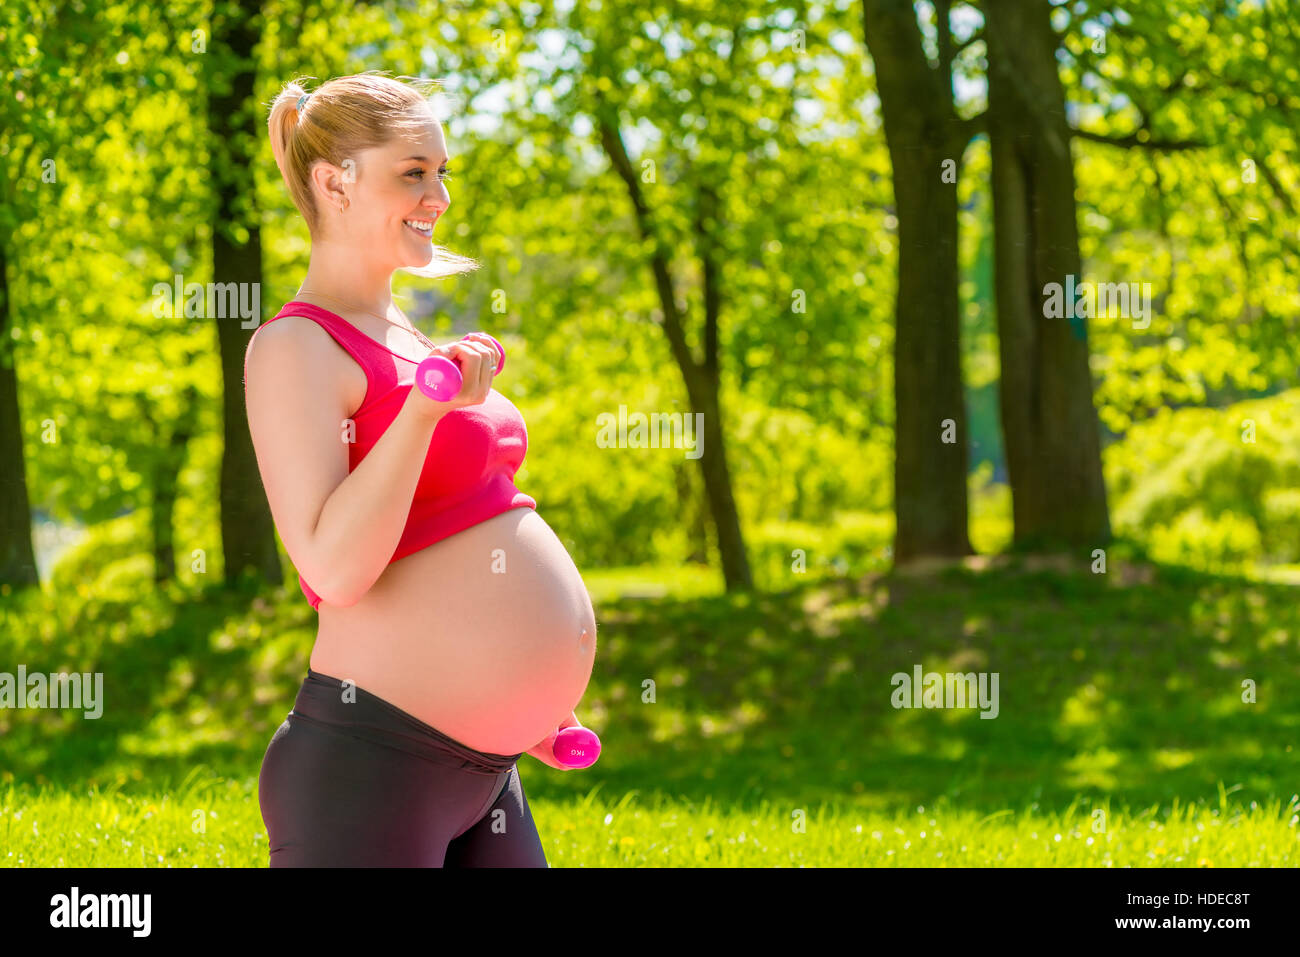 playing sports during pregnancy in the fresh air is good for health Stock Photo